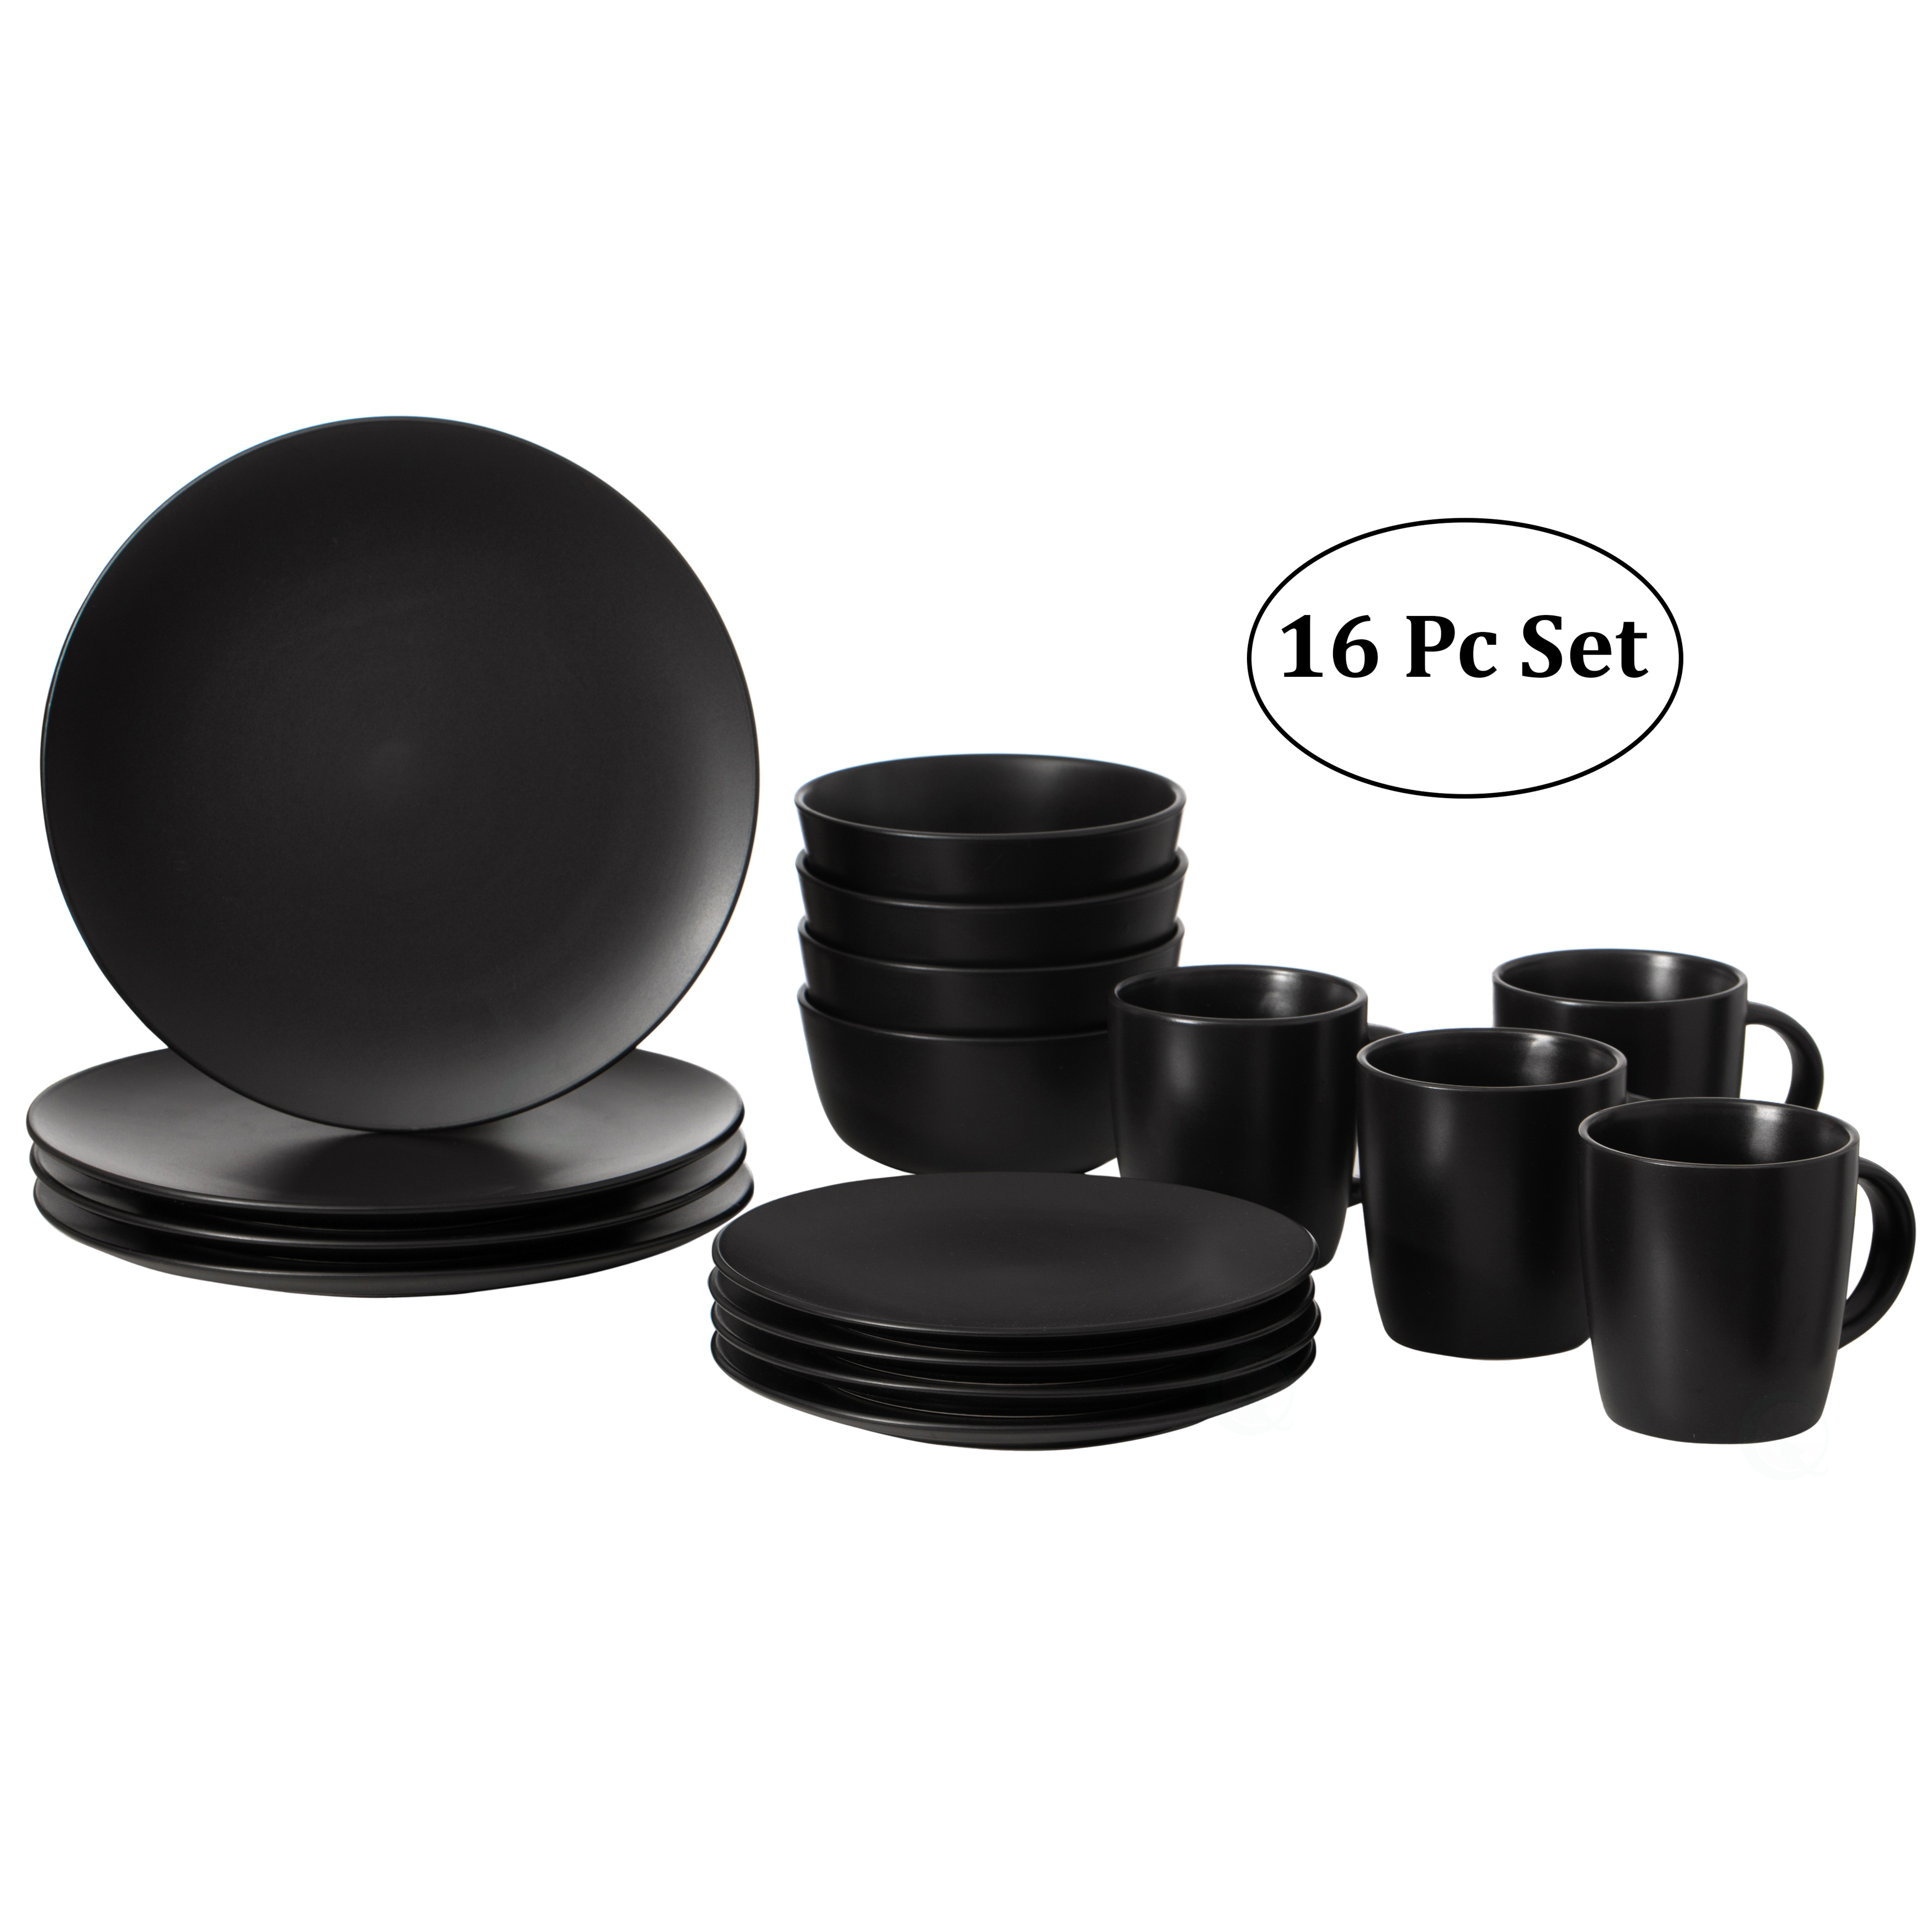 16 PC Dinnerware Dish Set for 4 Person Mugs, Salad and Dinner Plates and Bowls Sets, High Quality Dishes, Dishwasher and Microwave Safe